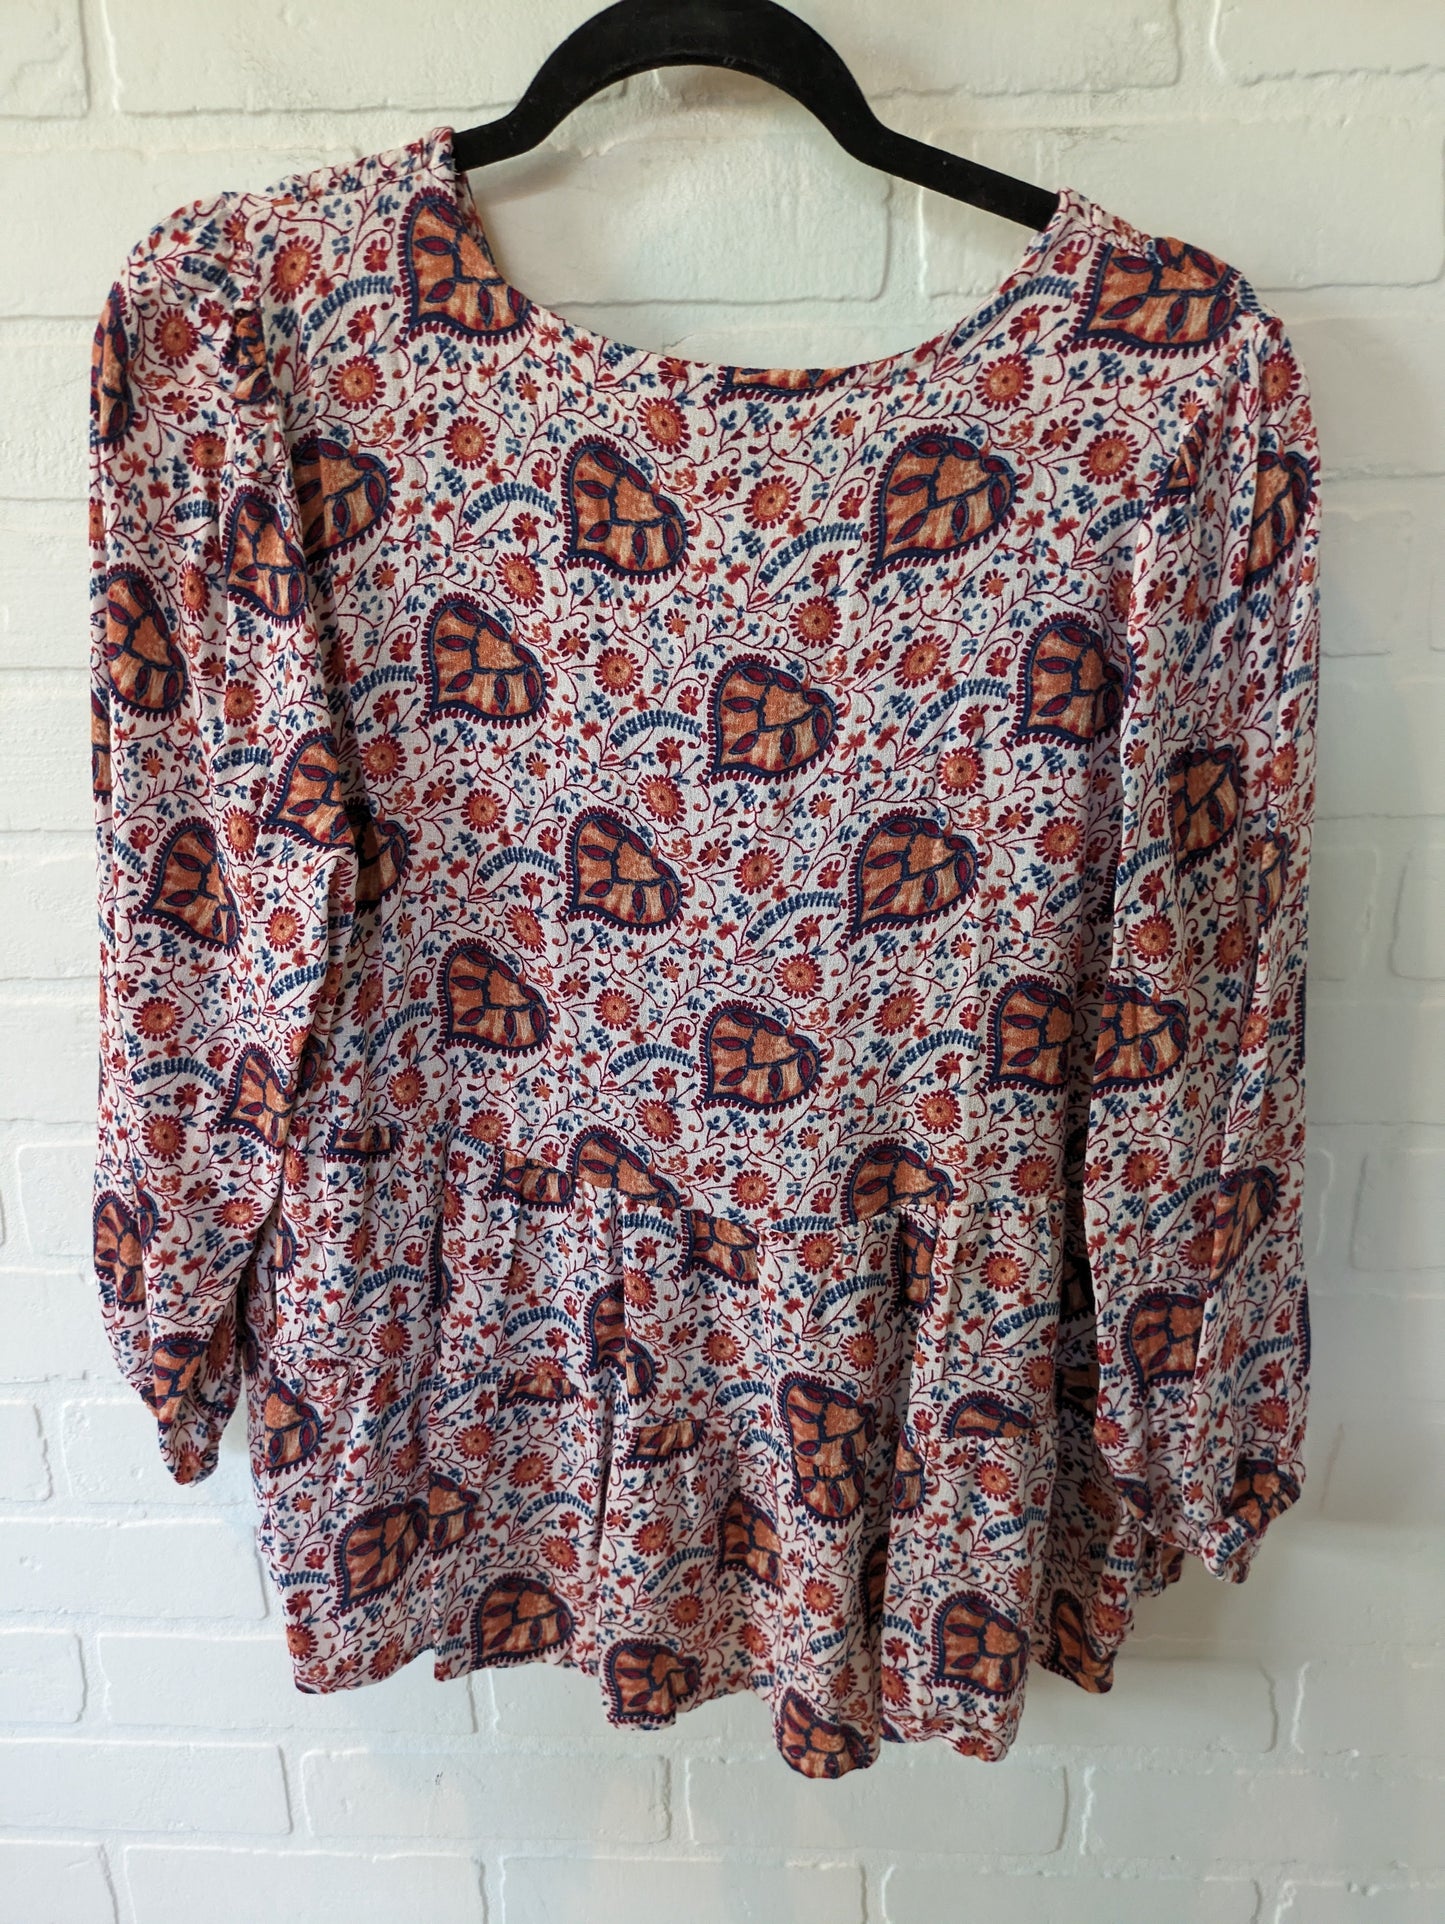 Red & White Top 3/4 Sleeve Lucky Brand, Size L